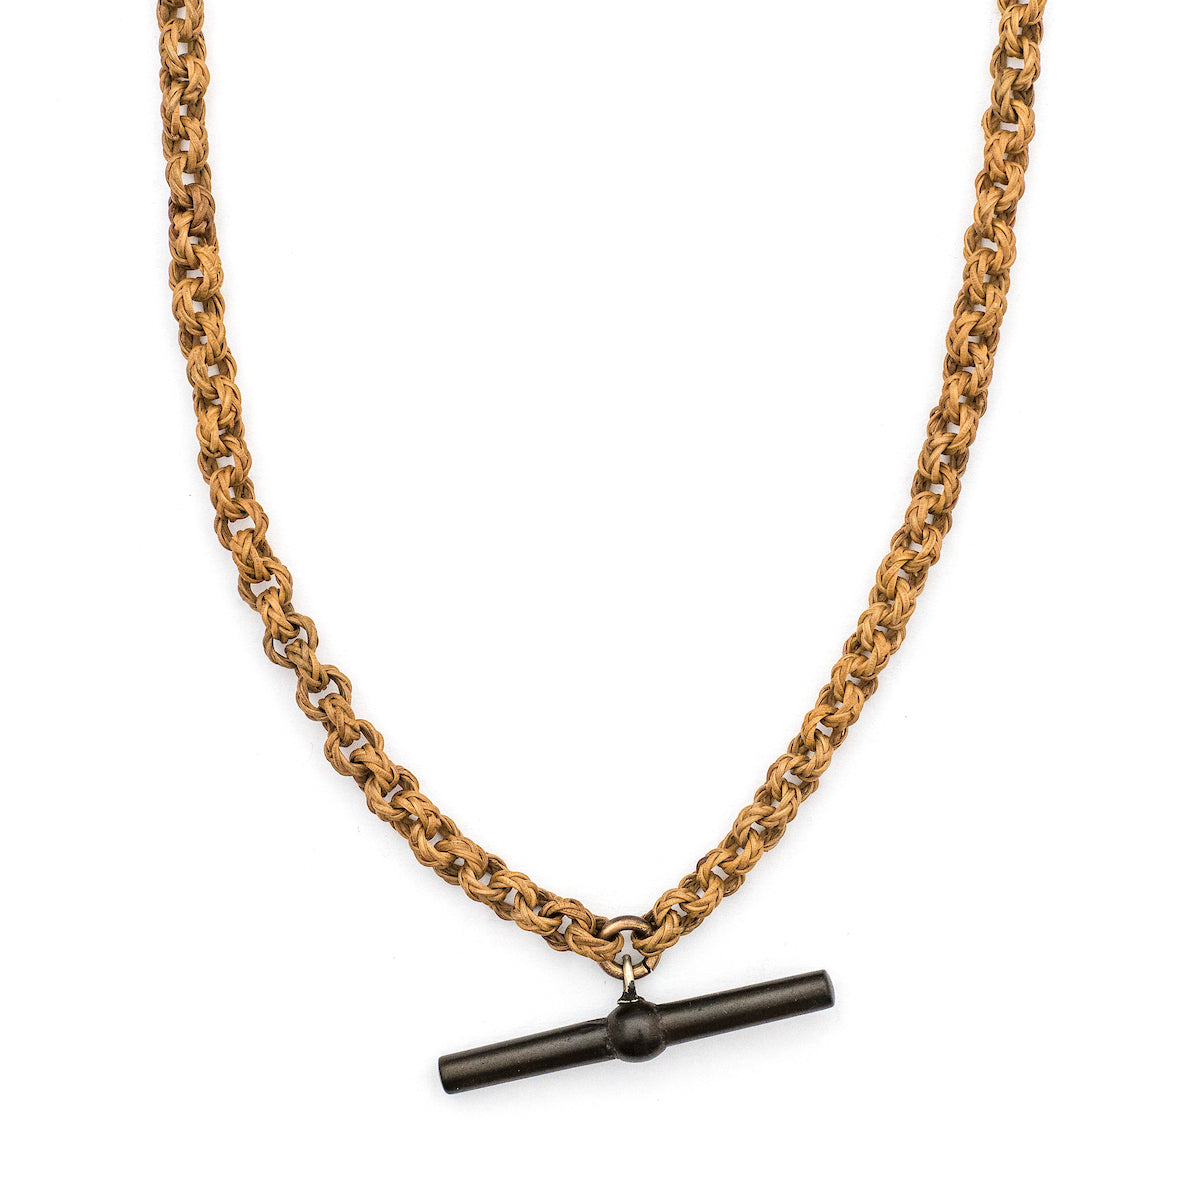 This unusual watch chain is made of finely woven rattan links creating a three dimensional cable style chain, complete with a T bar and hook clasp. Measuring at a very wearable 24" long, you can wear this chain layered with other pieces or alone paired with one of our antique gold fill lockets or charms. Close up chain view, showing t bar